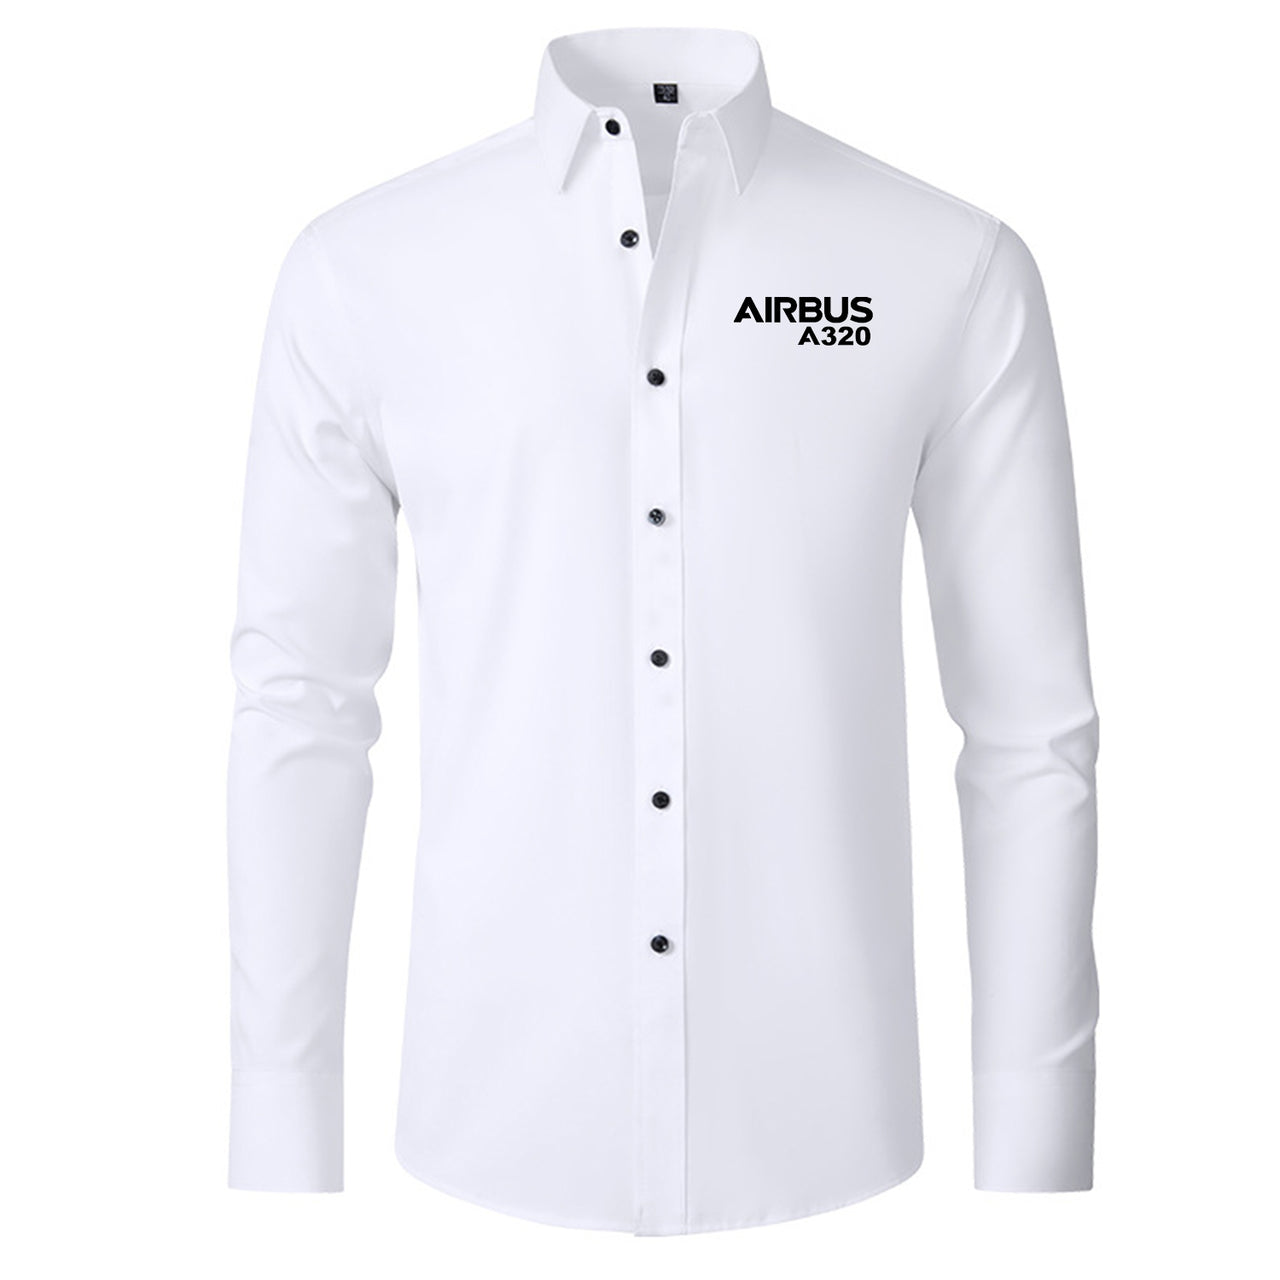 Airbus A320 & Text Designed Long Sleeve Shirts